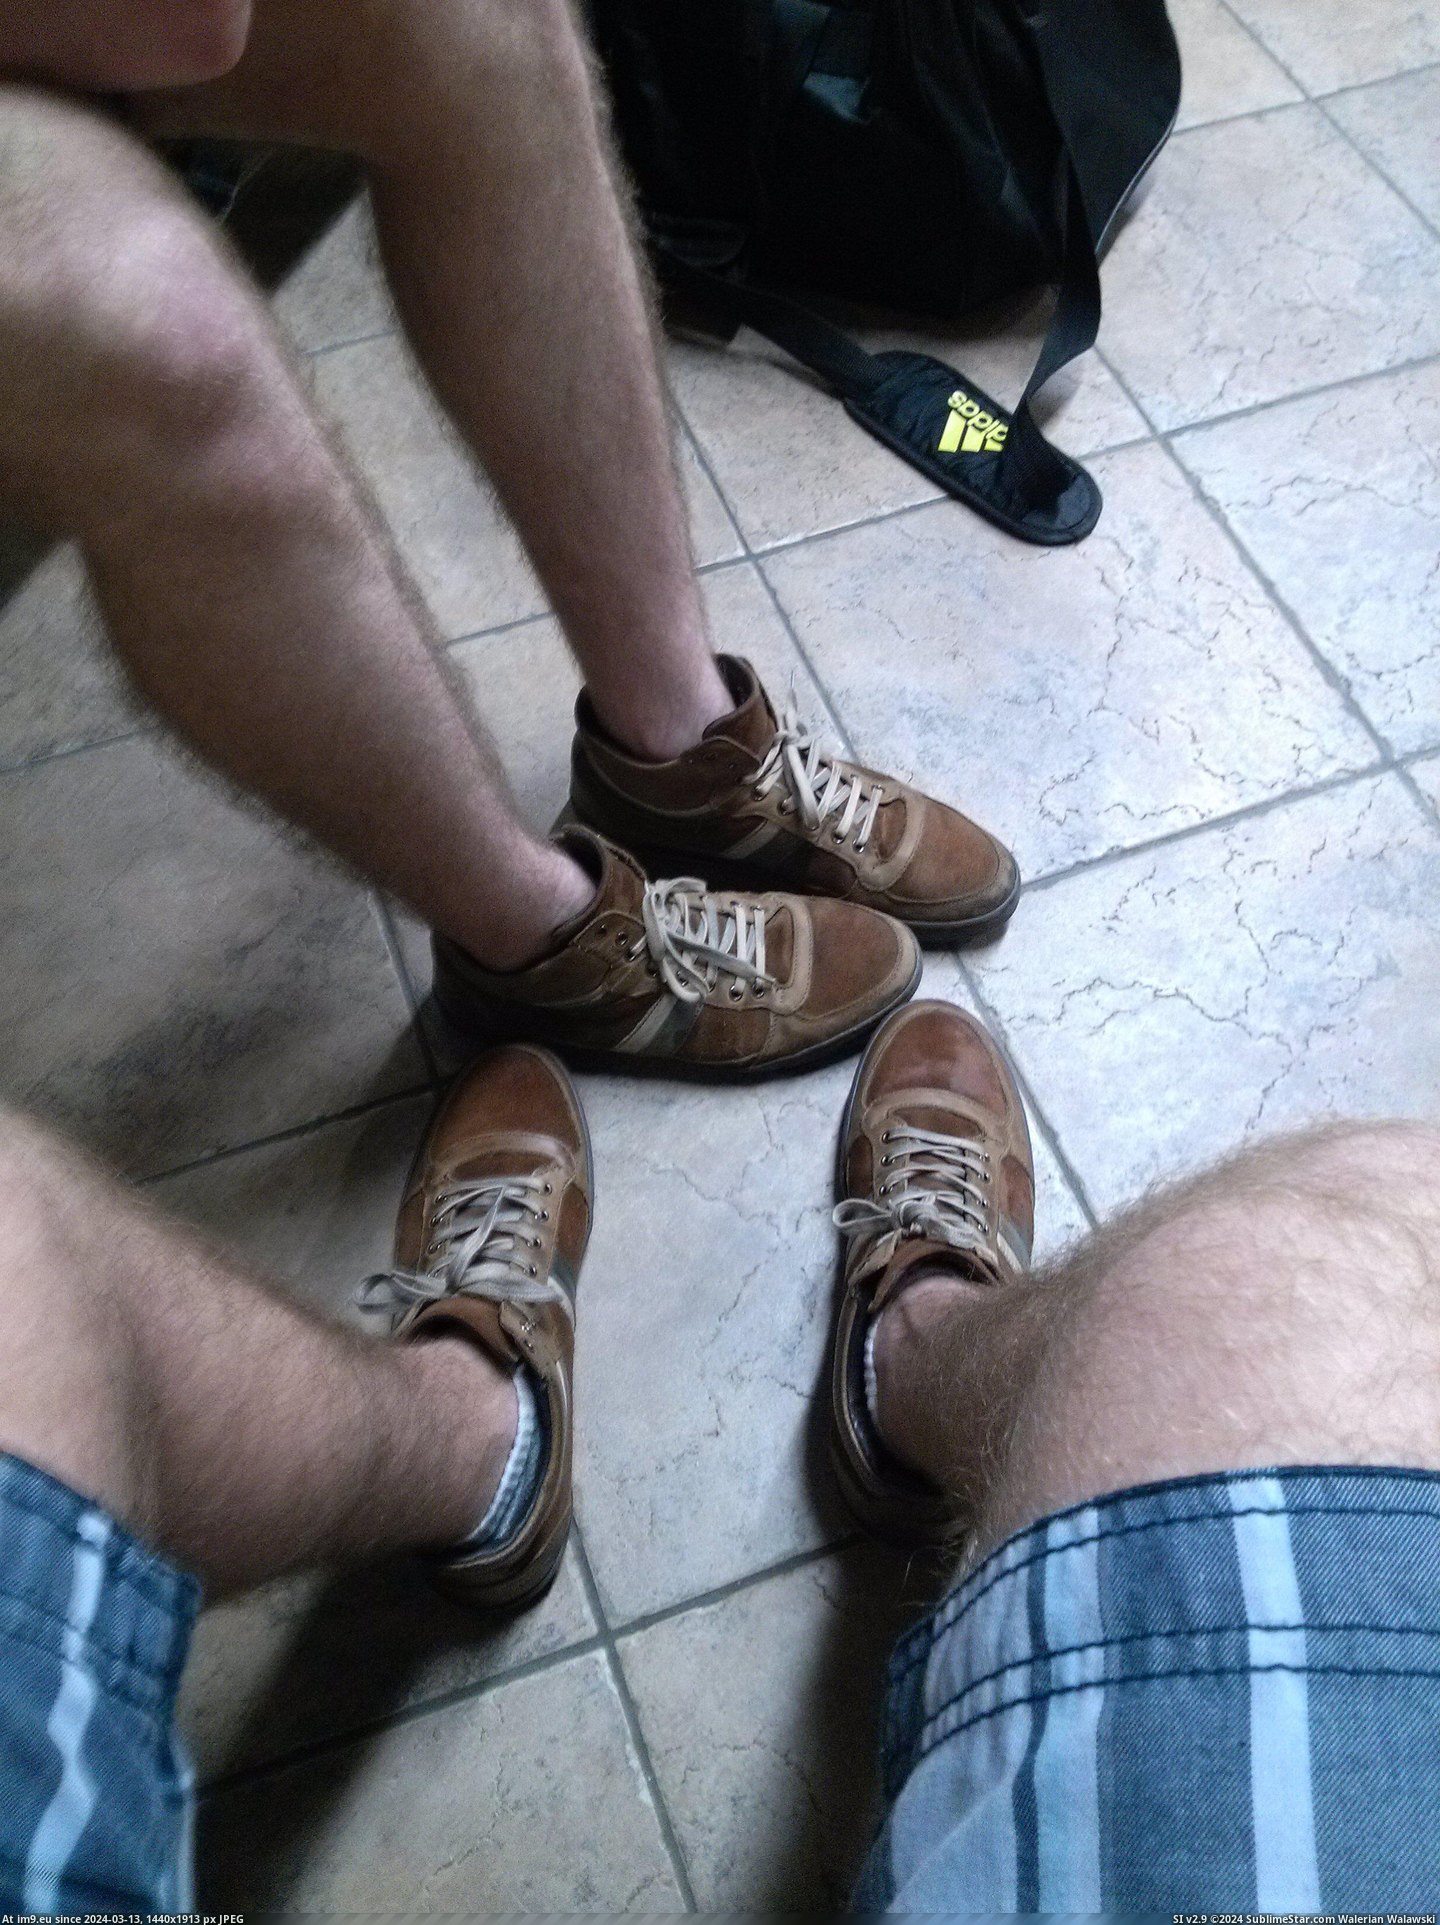 #Did #Bought #Country #Identical #Kno #Twin #Lives #Shoes [Mildlyinteresting] My identical twin who lives in a different country, bought the same shoes as I did. Without either of us kno Pic. (Obraz z album My r/MILDLYINTERESTING favs))